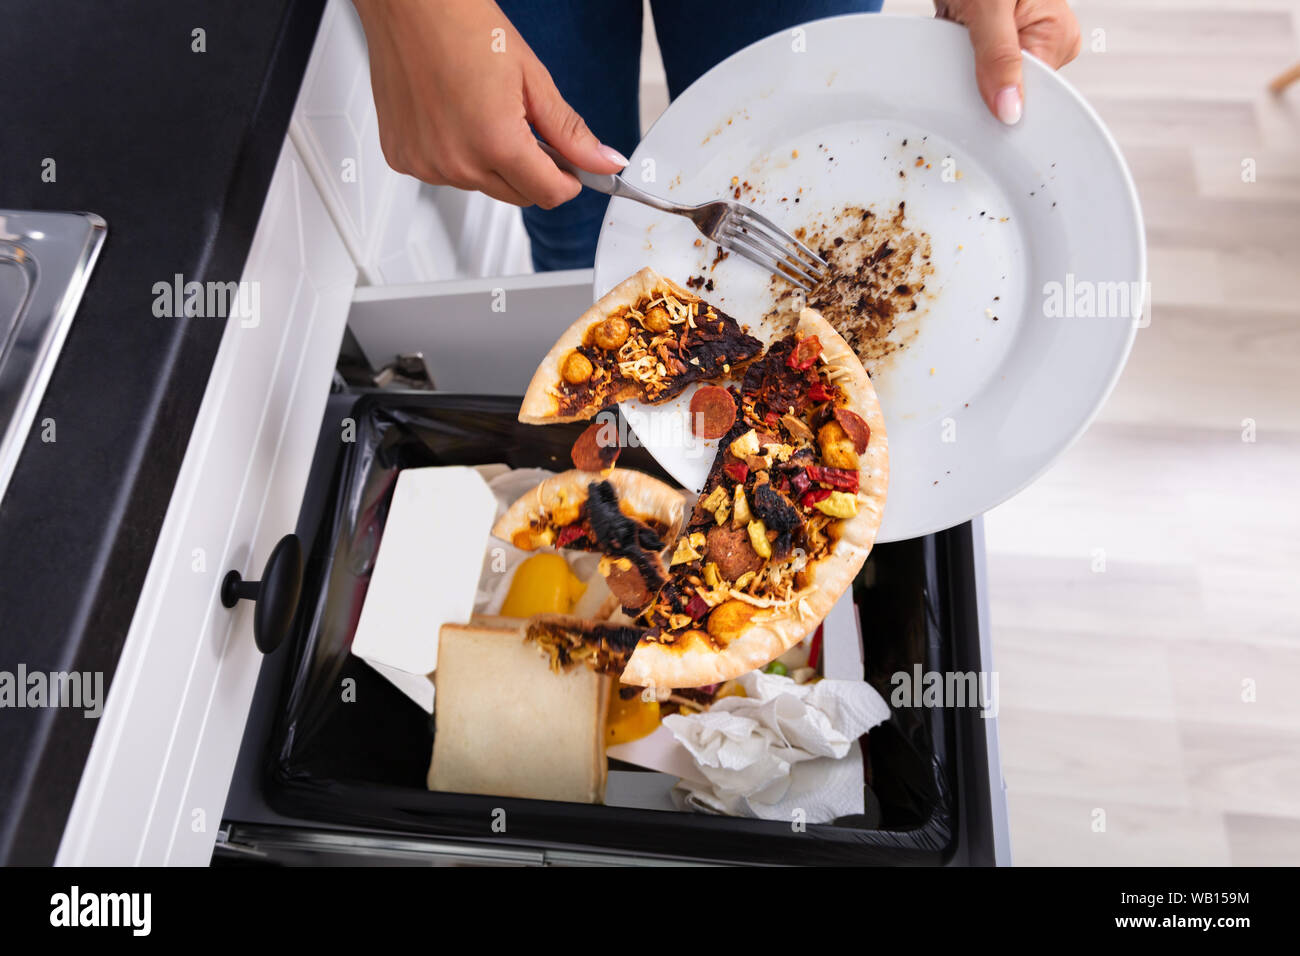 Close-up Of A Person Throwing Pepperoni Pizza On Plate In Dustbin Stock Photo